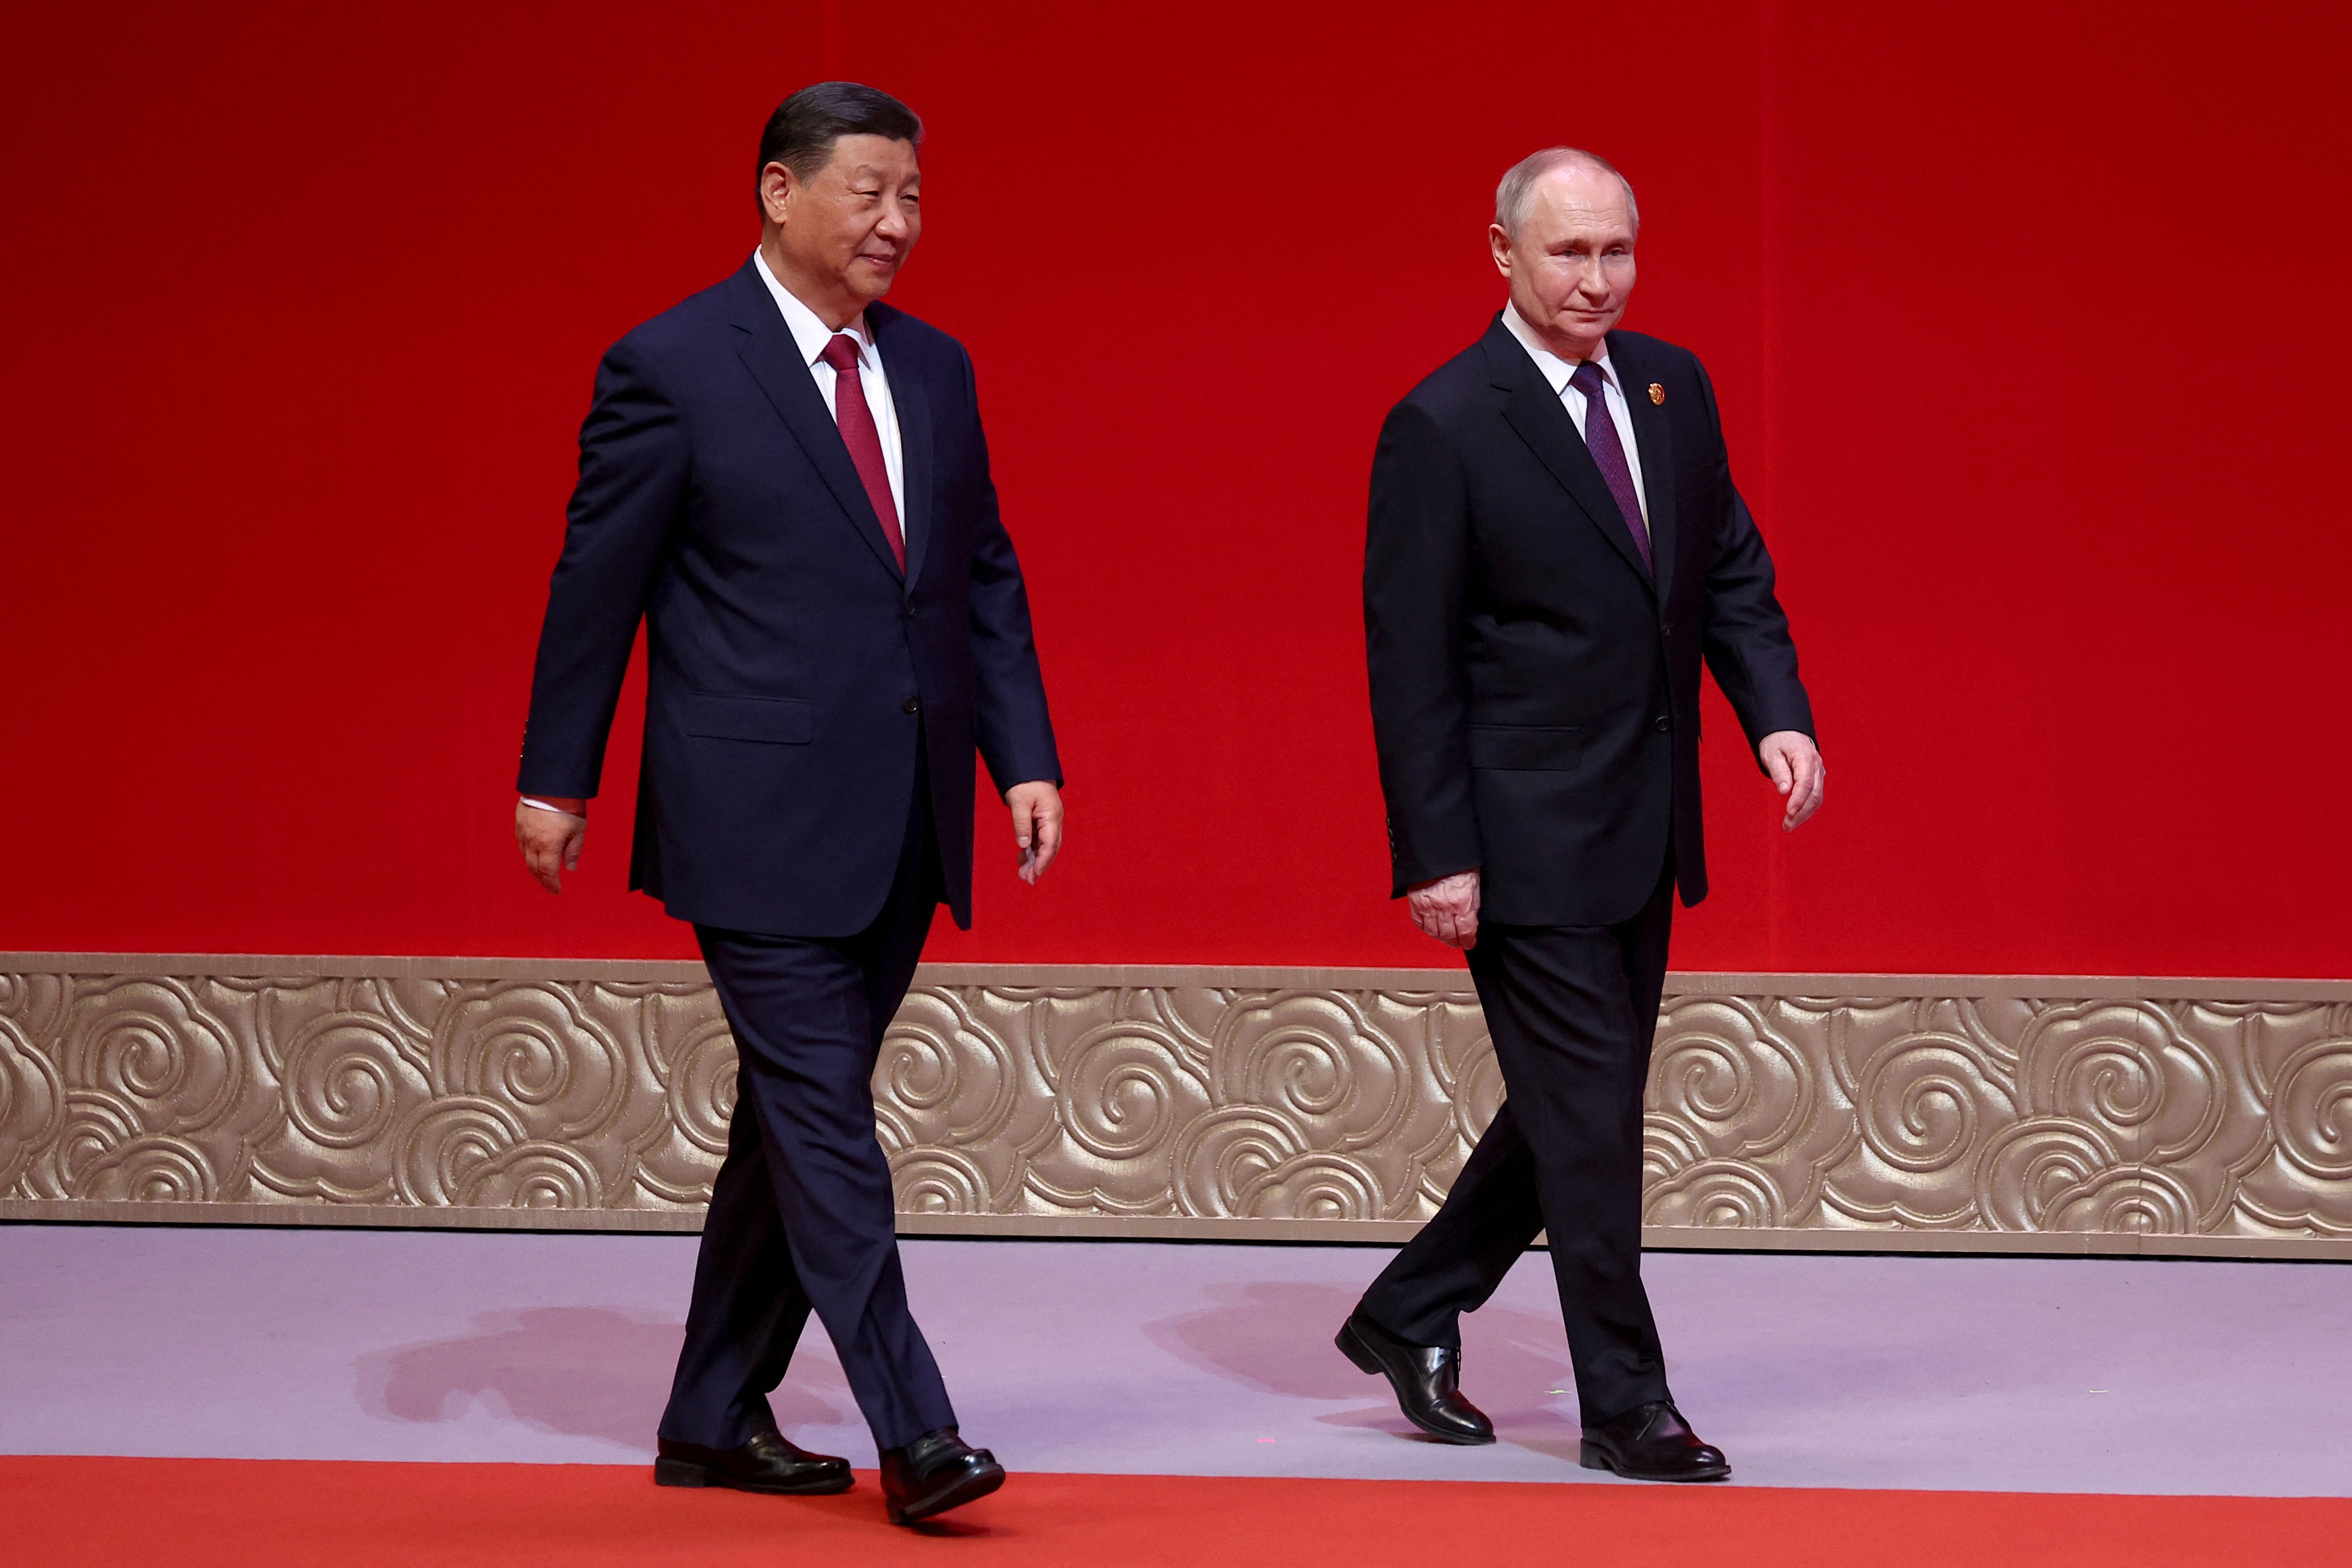 Song and dance: Vladimir Putin and Xi Jinping attend a concert celebrating 75 years of relations between Russia and China